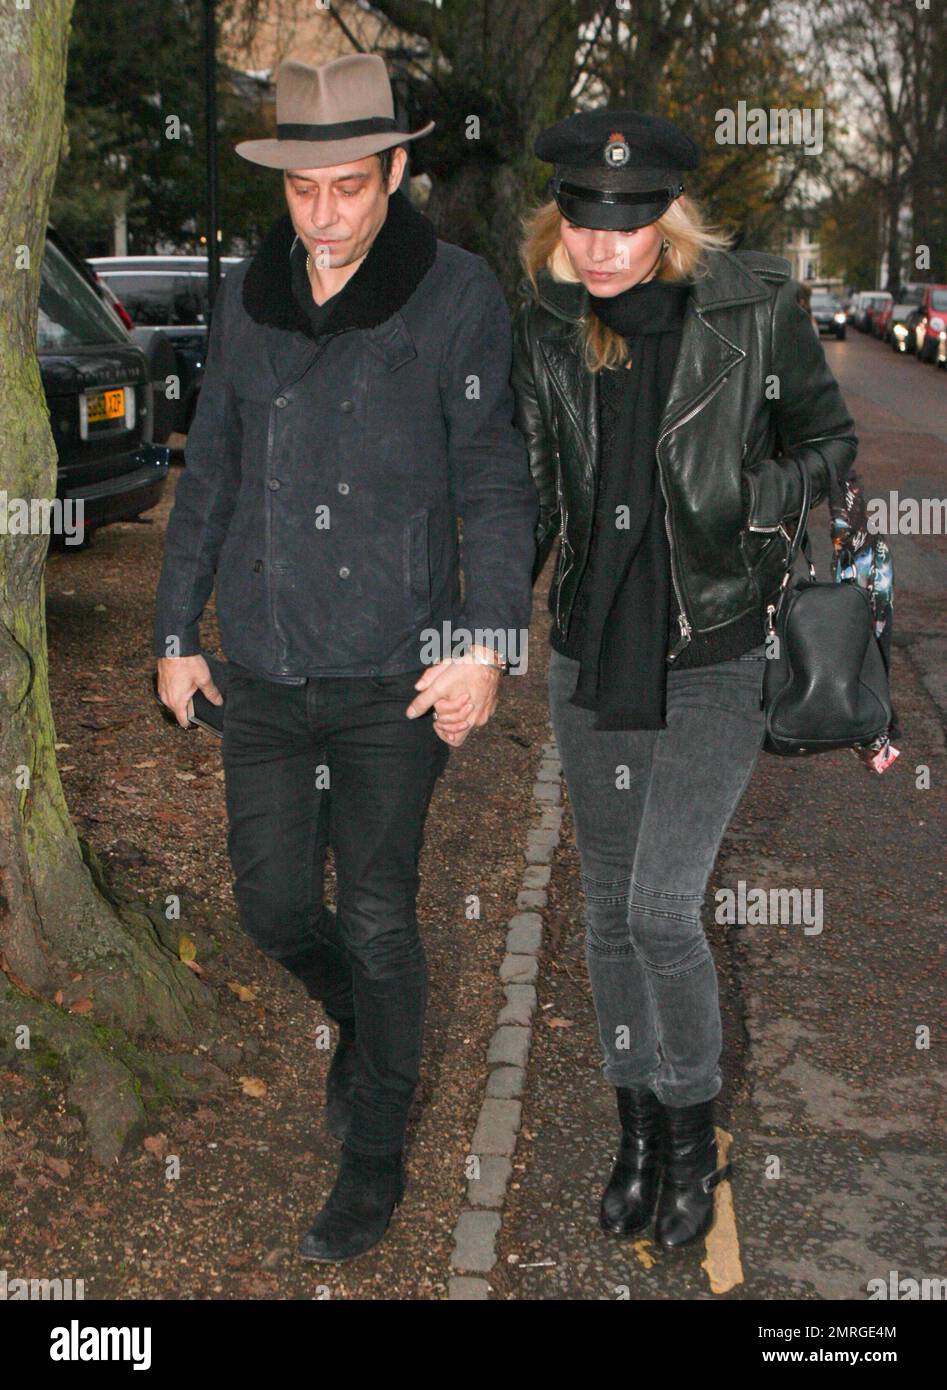 Supermodel Kate Moss and rocker husband Jamie Hince of 'The Kills' were seen walking hand in hand as they arrived at their new home in Hampstead. Its been reported that Kate paid out an estimated $30,000 at The Hoping Foundation Benefit to hear Boy George sing her favorite song. Kate got up from her table and joined Boy George in singing 'Do You Really Want To Hurt Me,' after shelling out the money for the privilege. London, UK. 23rd November 2011.   . Stock Photo